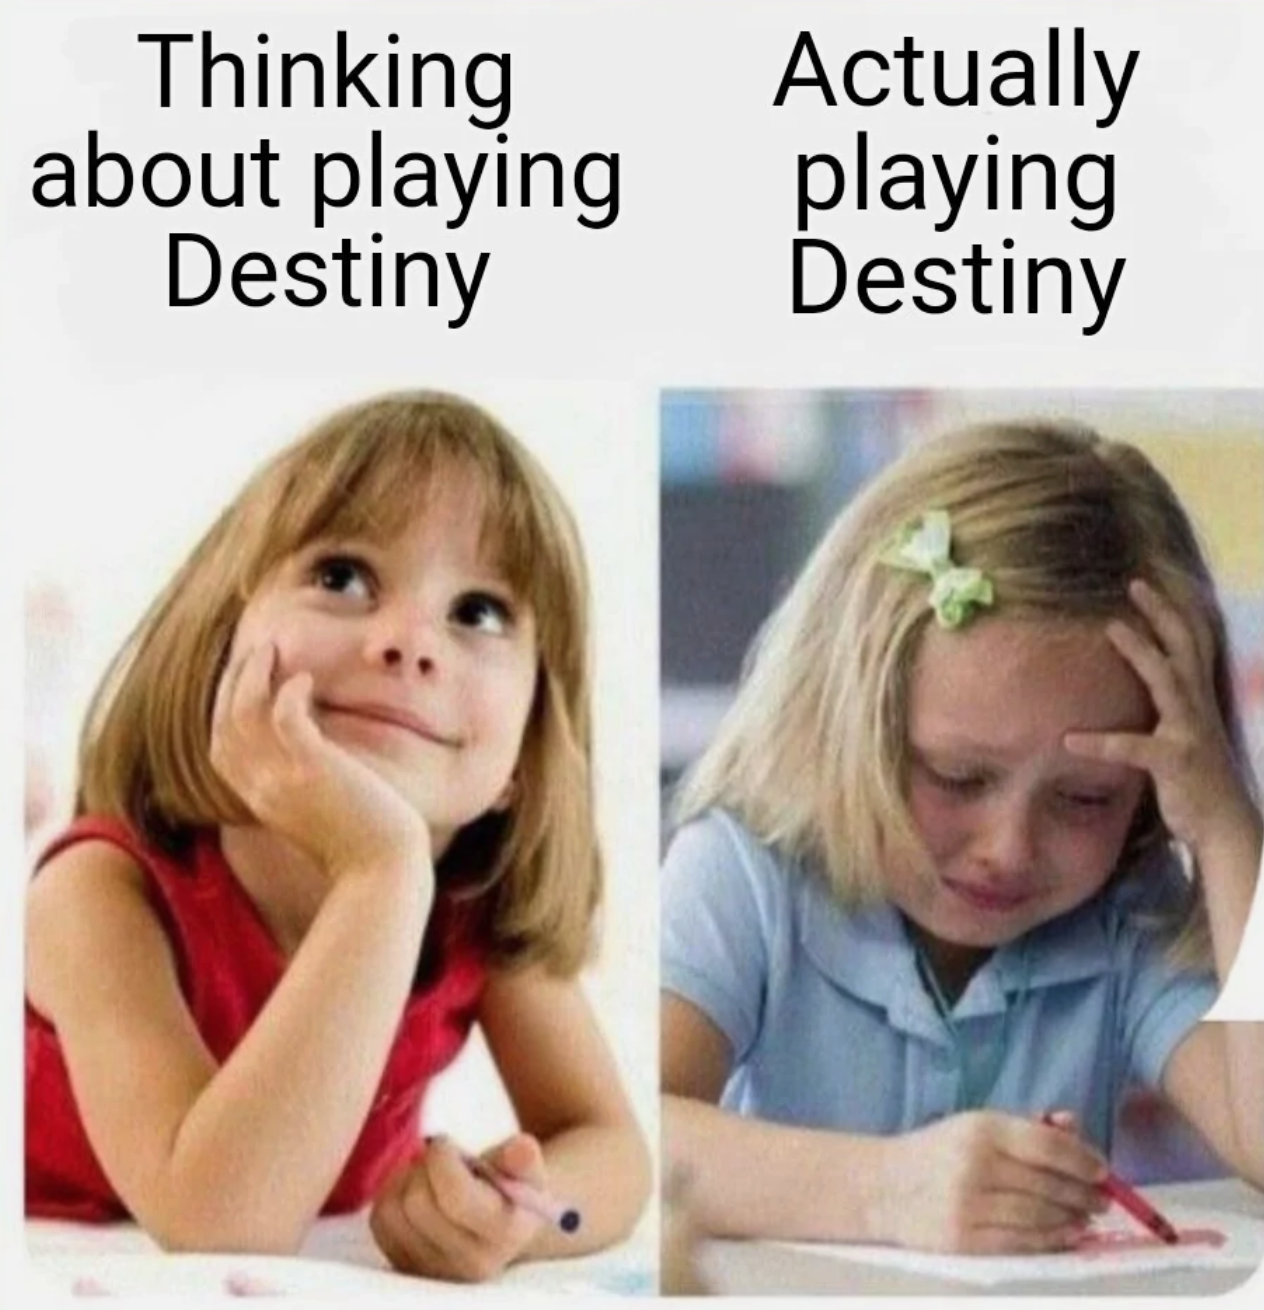 gaming meme - Thinking about playing Destiny Actually playing Destiny